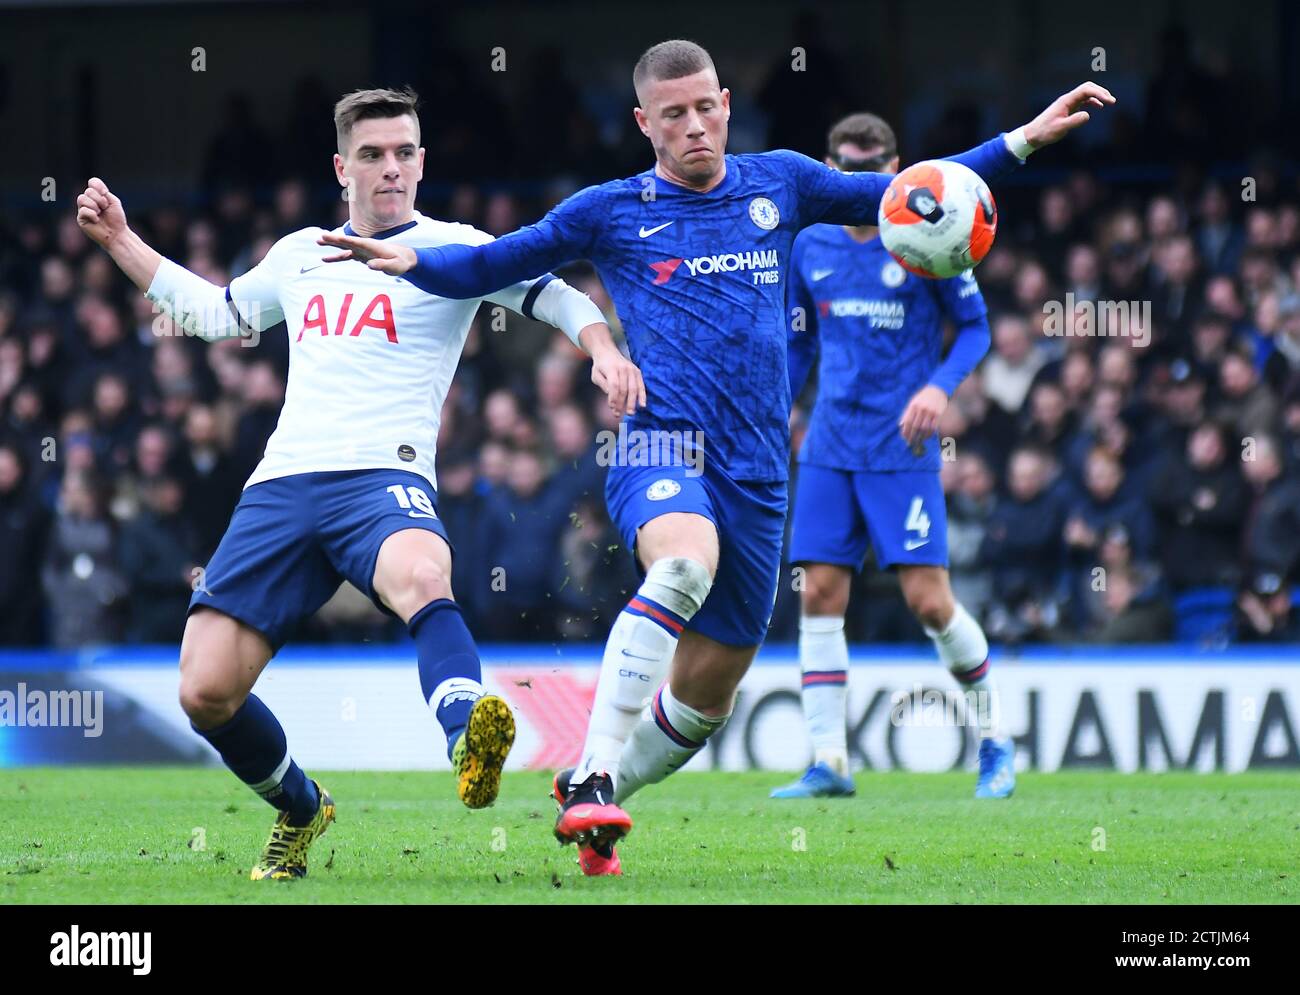 LONDON, ENGLAND - FEBRUARY 22, 2020: Giovani Lo Celso of Tottenham and Ross Barkley of Chelsea pictured during the 2019/20 Premier League game between Chelsea FC and Tottenham Hotspur FC at Stamford Bridge. Stock Photo